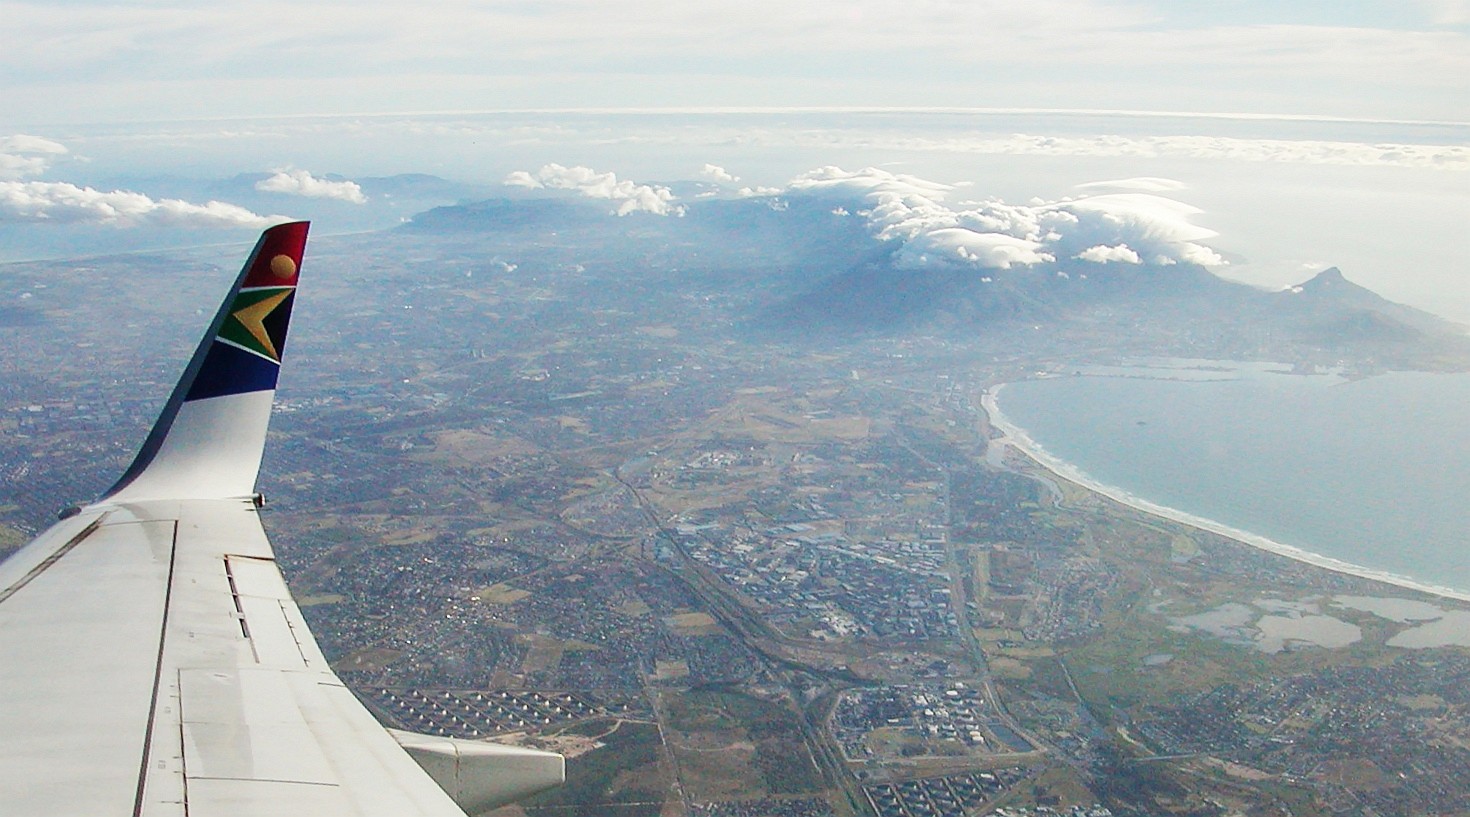 Cape Town with Table Mountain